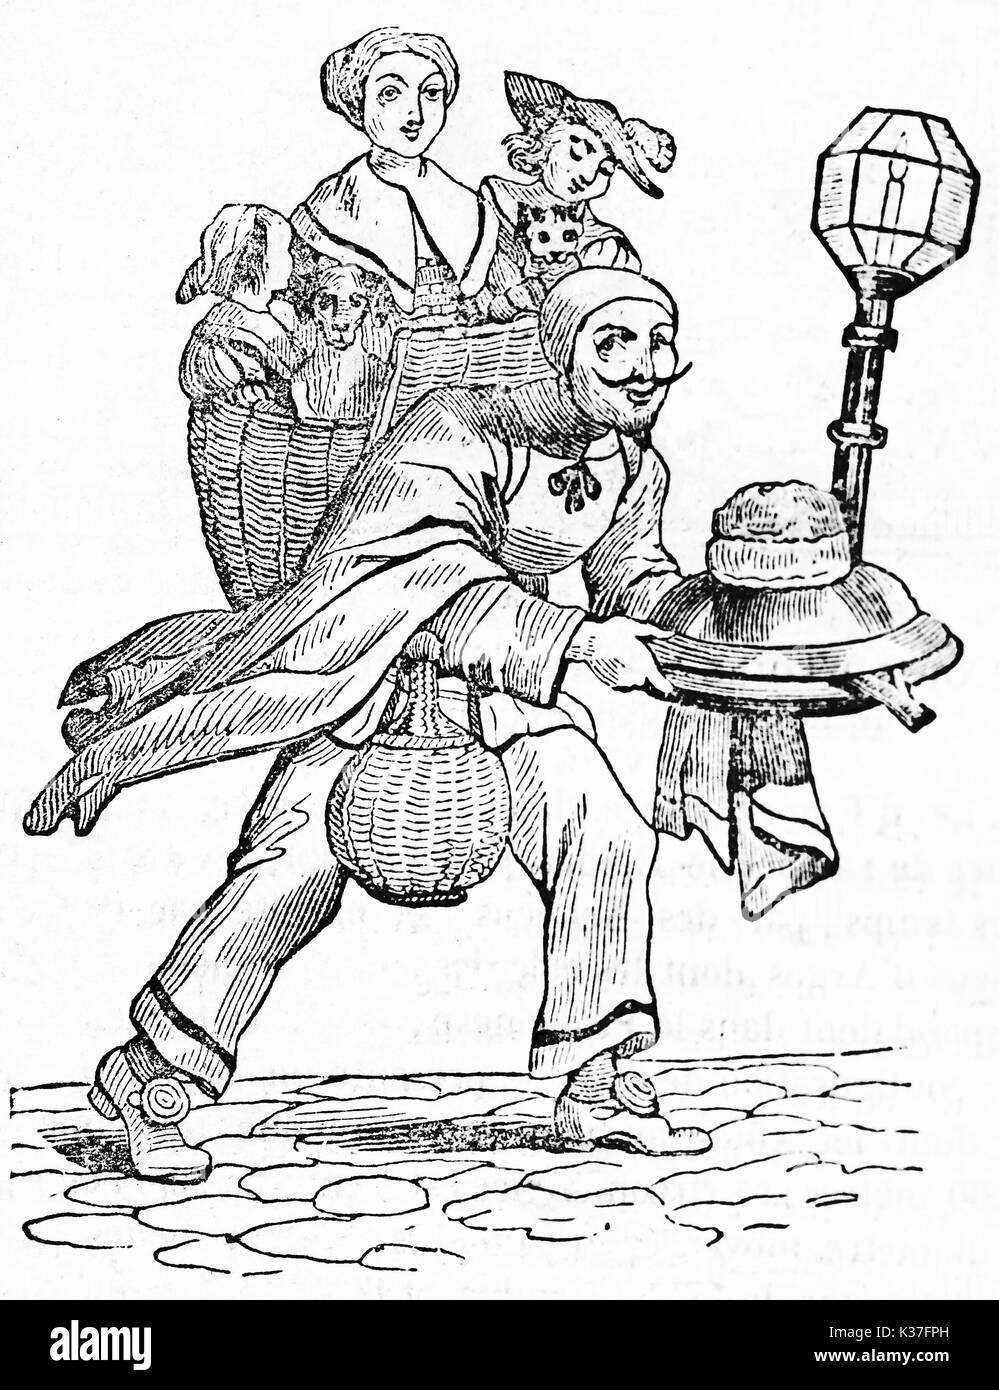 Funny full body portrait of Monsieur le Goguelu, 17th century, French scrounger and parasite. Old Illustration by unidentified author published on Magasin Pittoresque Paris 1834 Stock Photo